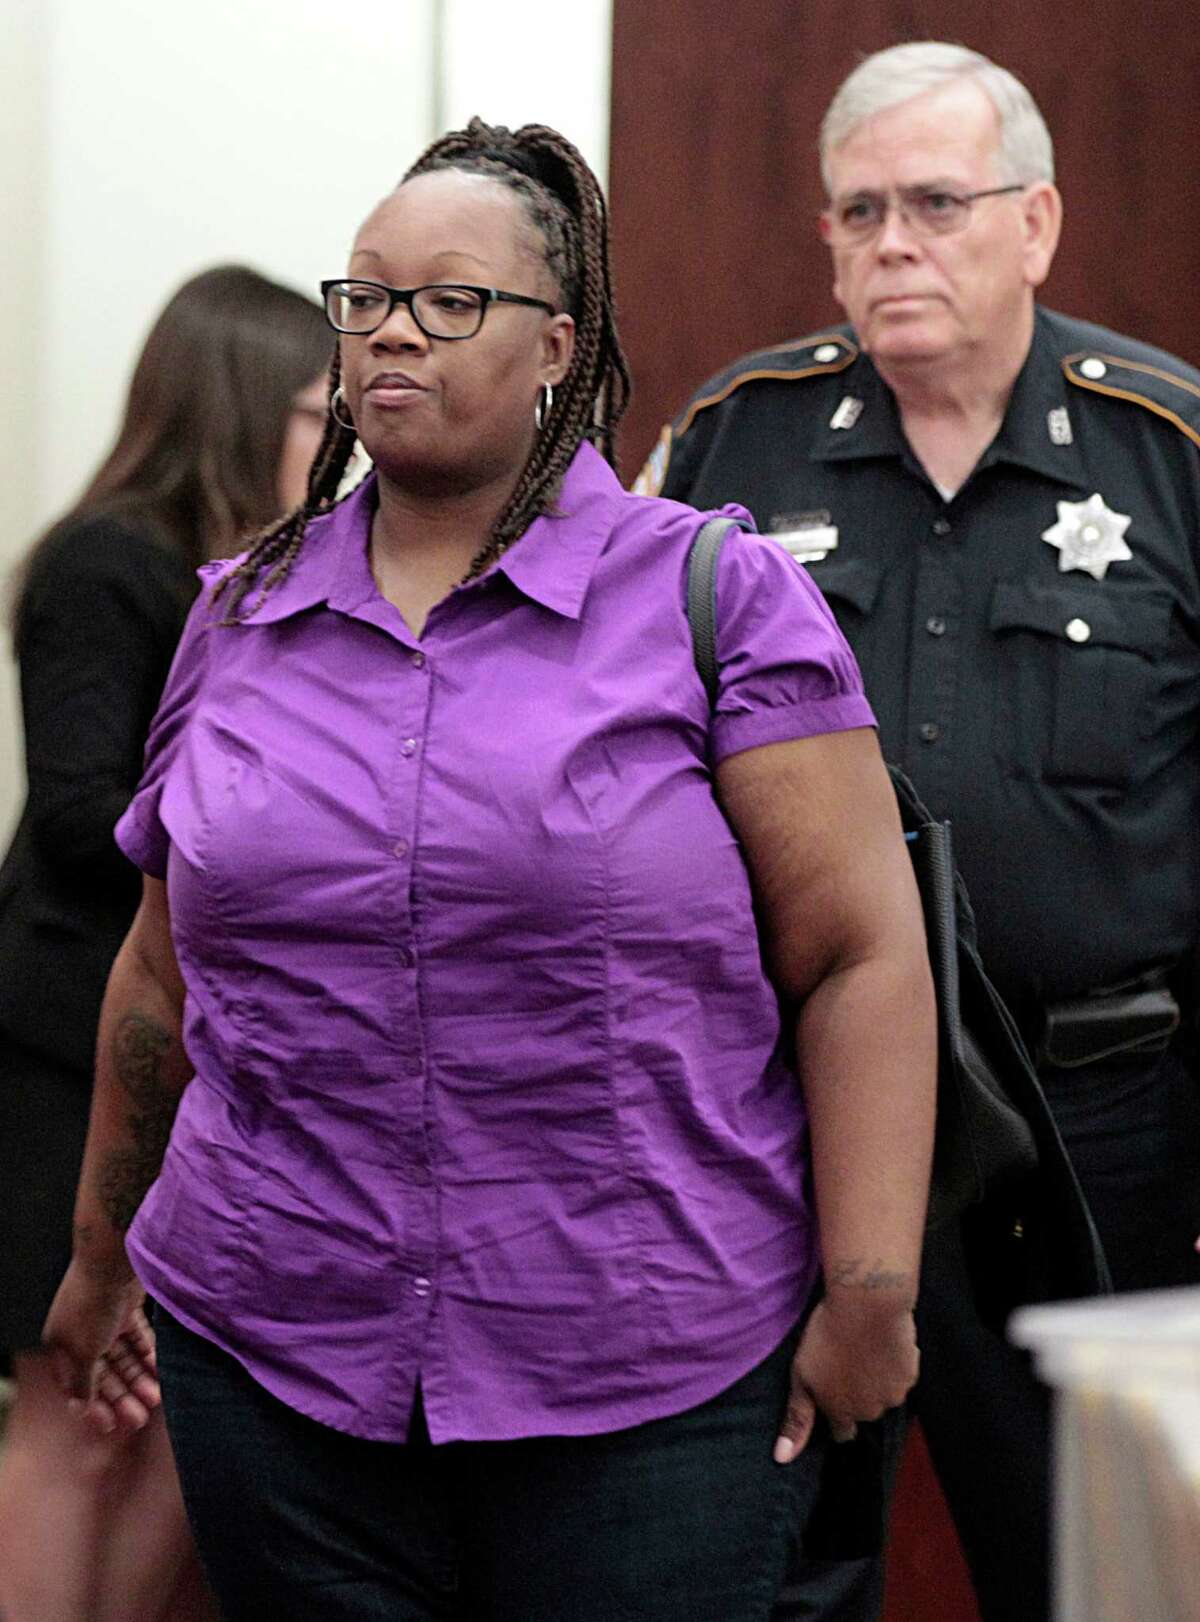 Crenshanda Williams during a her appearance before Judge John Clinton in County Criminal Court at Law #4 on two misdemeanor charges for interference with emergency telephone calls Oct. 17, 2016, in Houston. ( James Nielsen / Houston Chronicle )